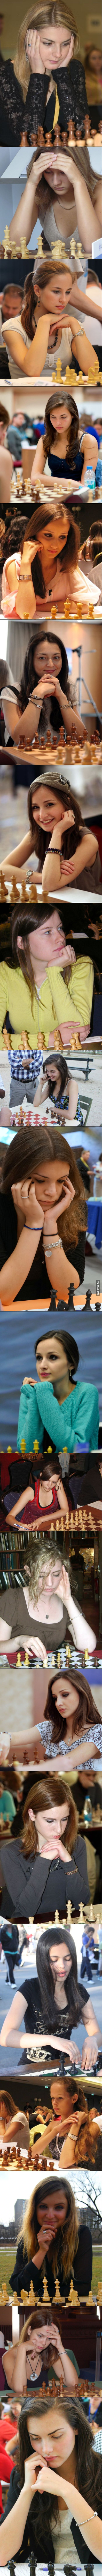 Apparently Chess is a beautiful game